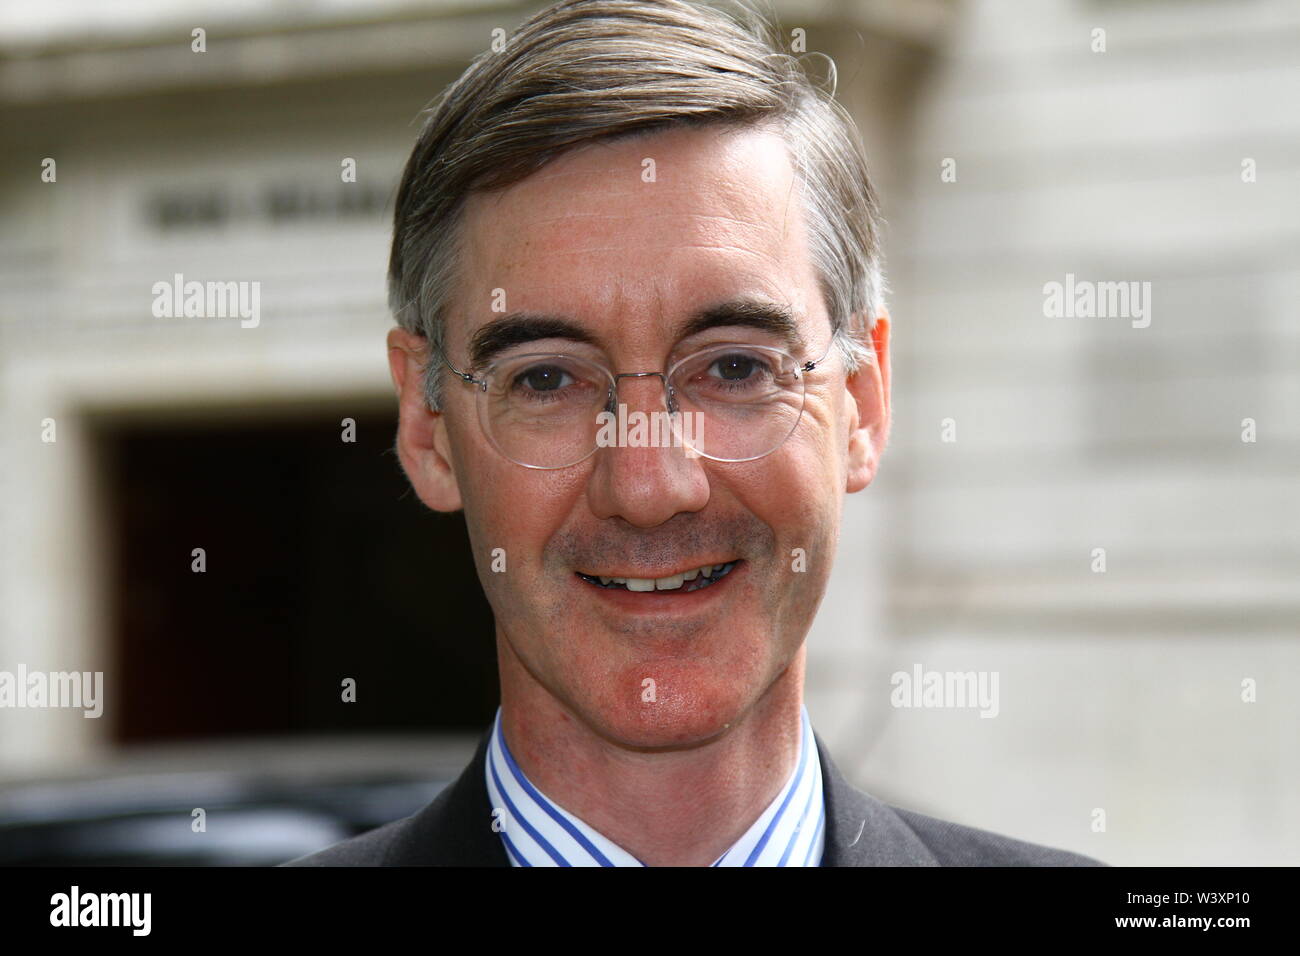 JACOB REES-MOGG MP PICTURED IN THE CITY OF WESTMINSTER ON 17TH JULY 2019. BRITISH POLITICIANS. CONSERVATIVE PARTY MPS. EUROPEAN RESEARCH GROUP. BREXIT. ERG. LEAVE MEANS LEAVE. NO DEAL NO PROBLEM. Famous politicians. Russell Moore portfolio page. Stock Photo